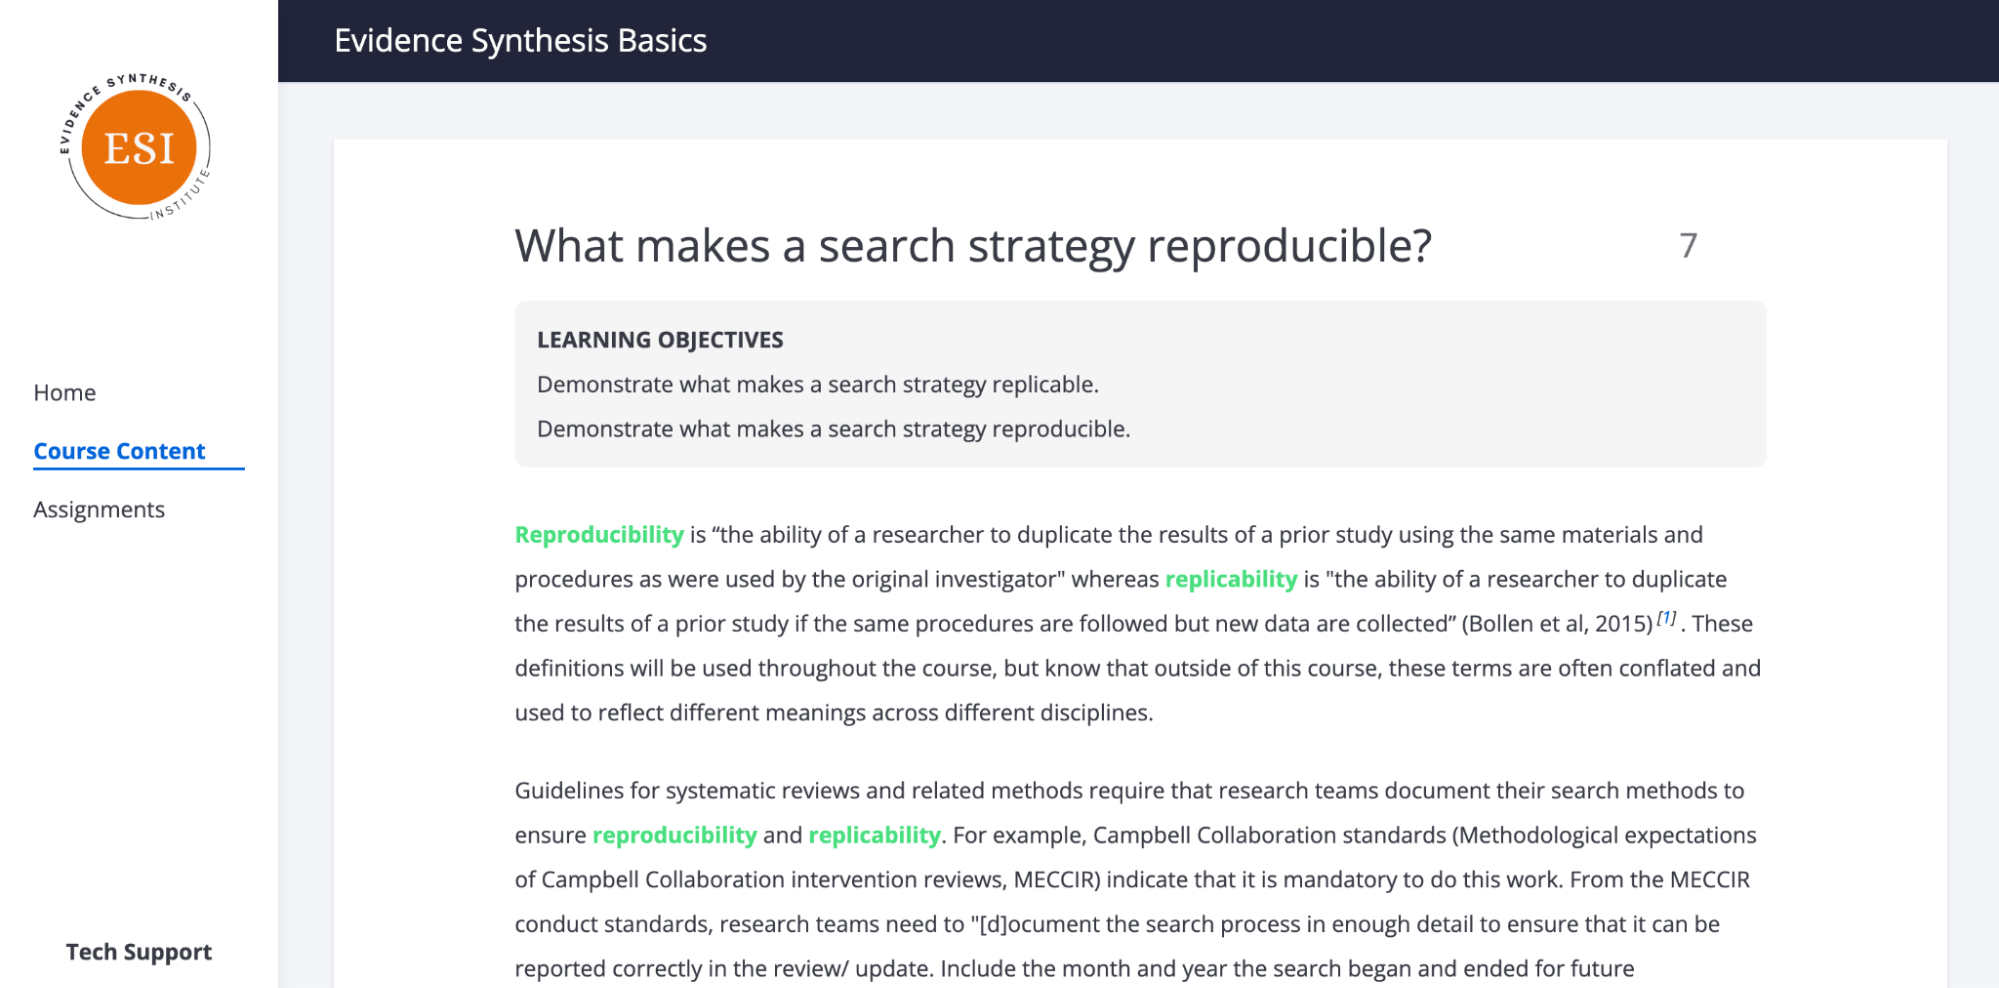 Screenshot from the "Evidence Synthesis for Librarians and Information Specialists" online course. Heading reads, "What makes a search strategy reproducible?" with learning objectives for the course listed below